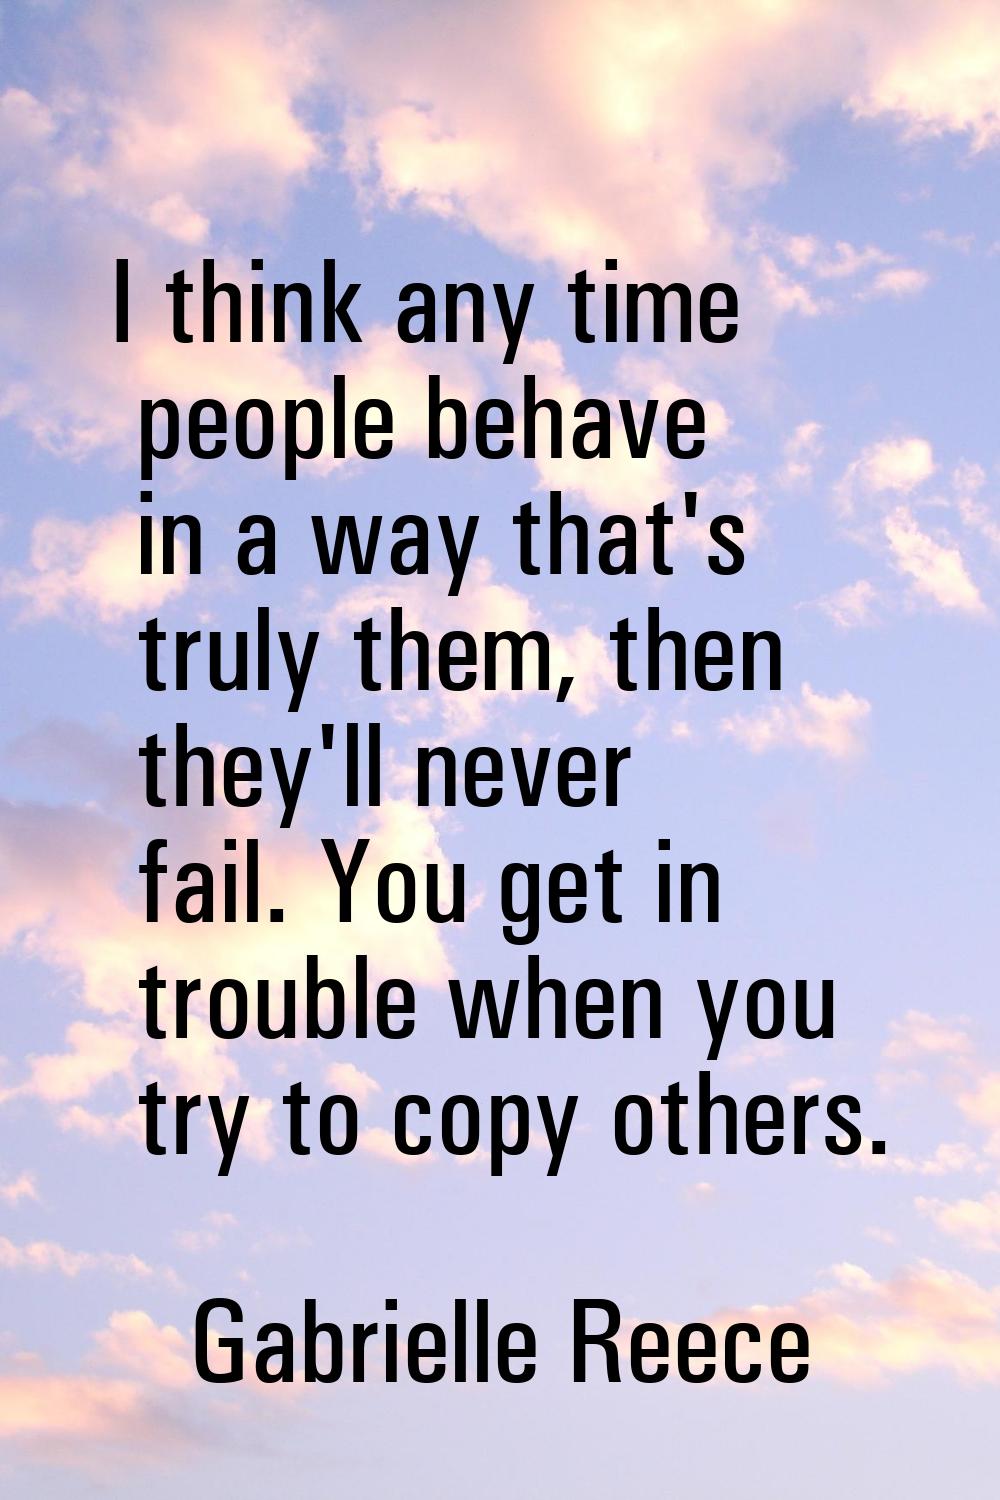 I think any time people behave in a way that's truly them, then they'll never fail. You get in trou